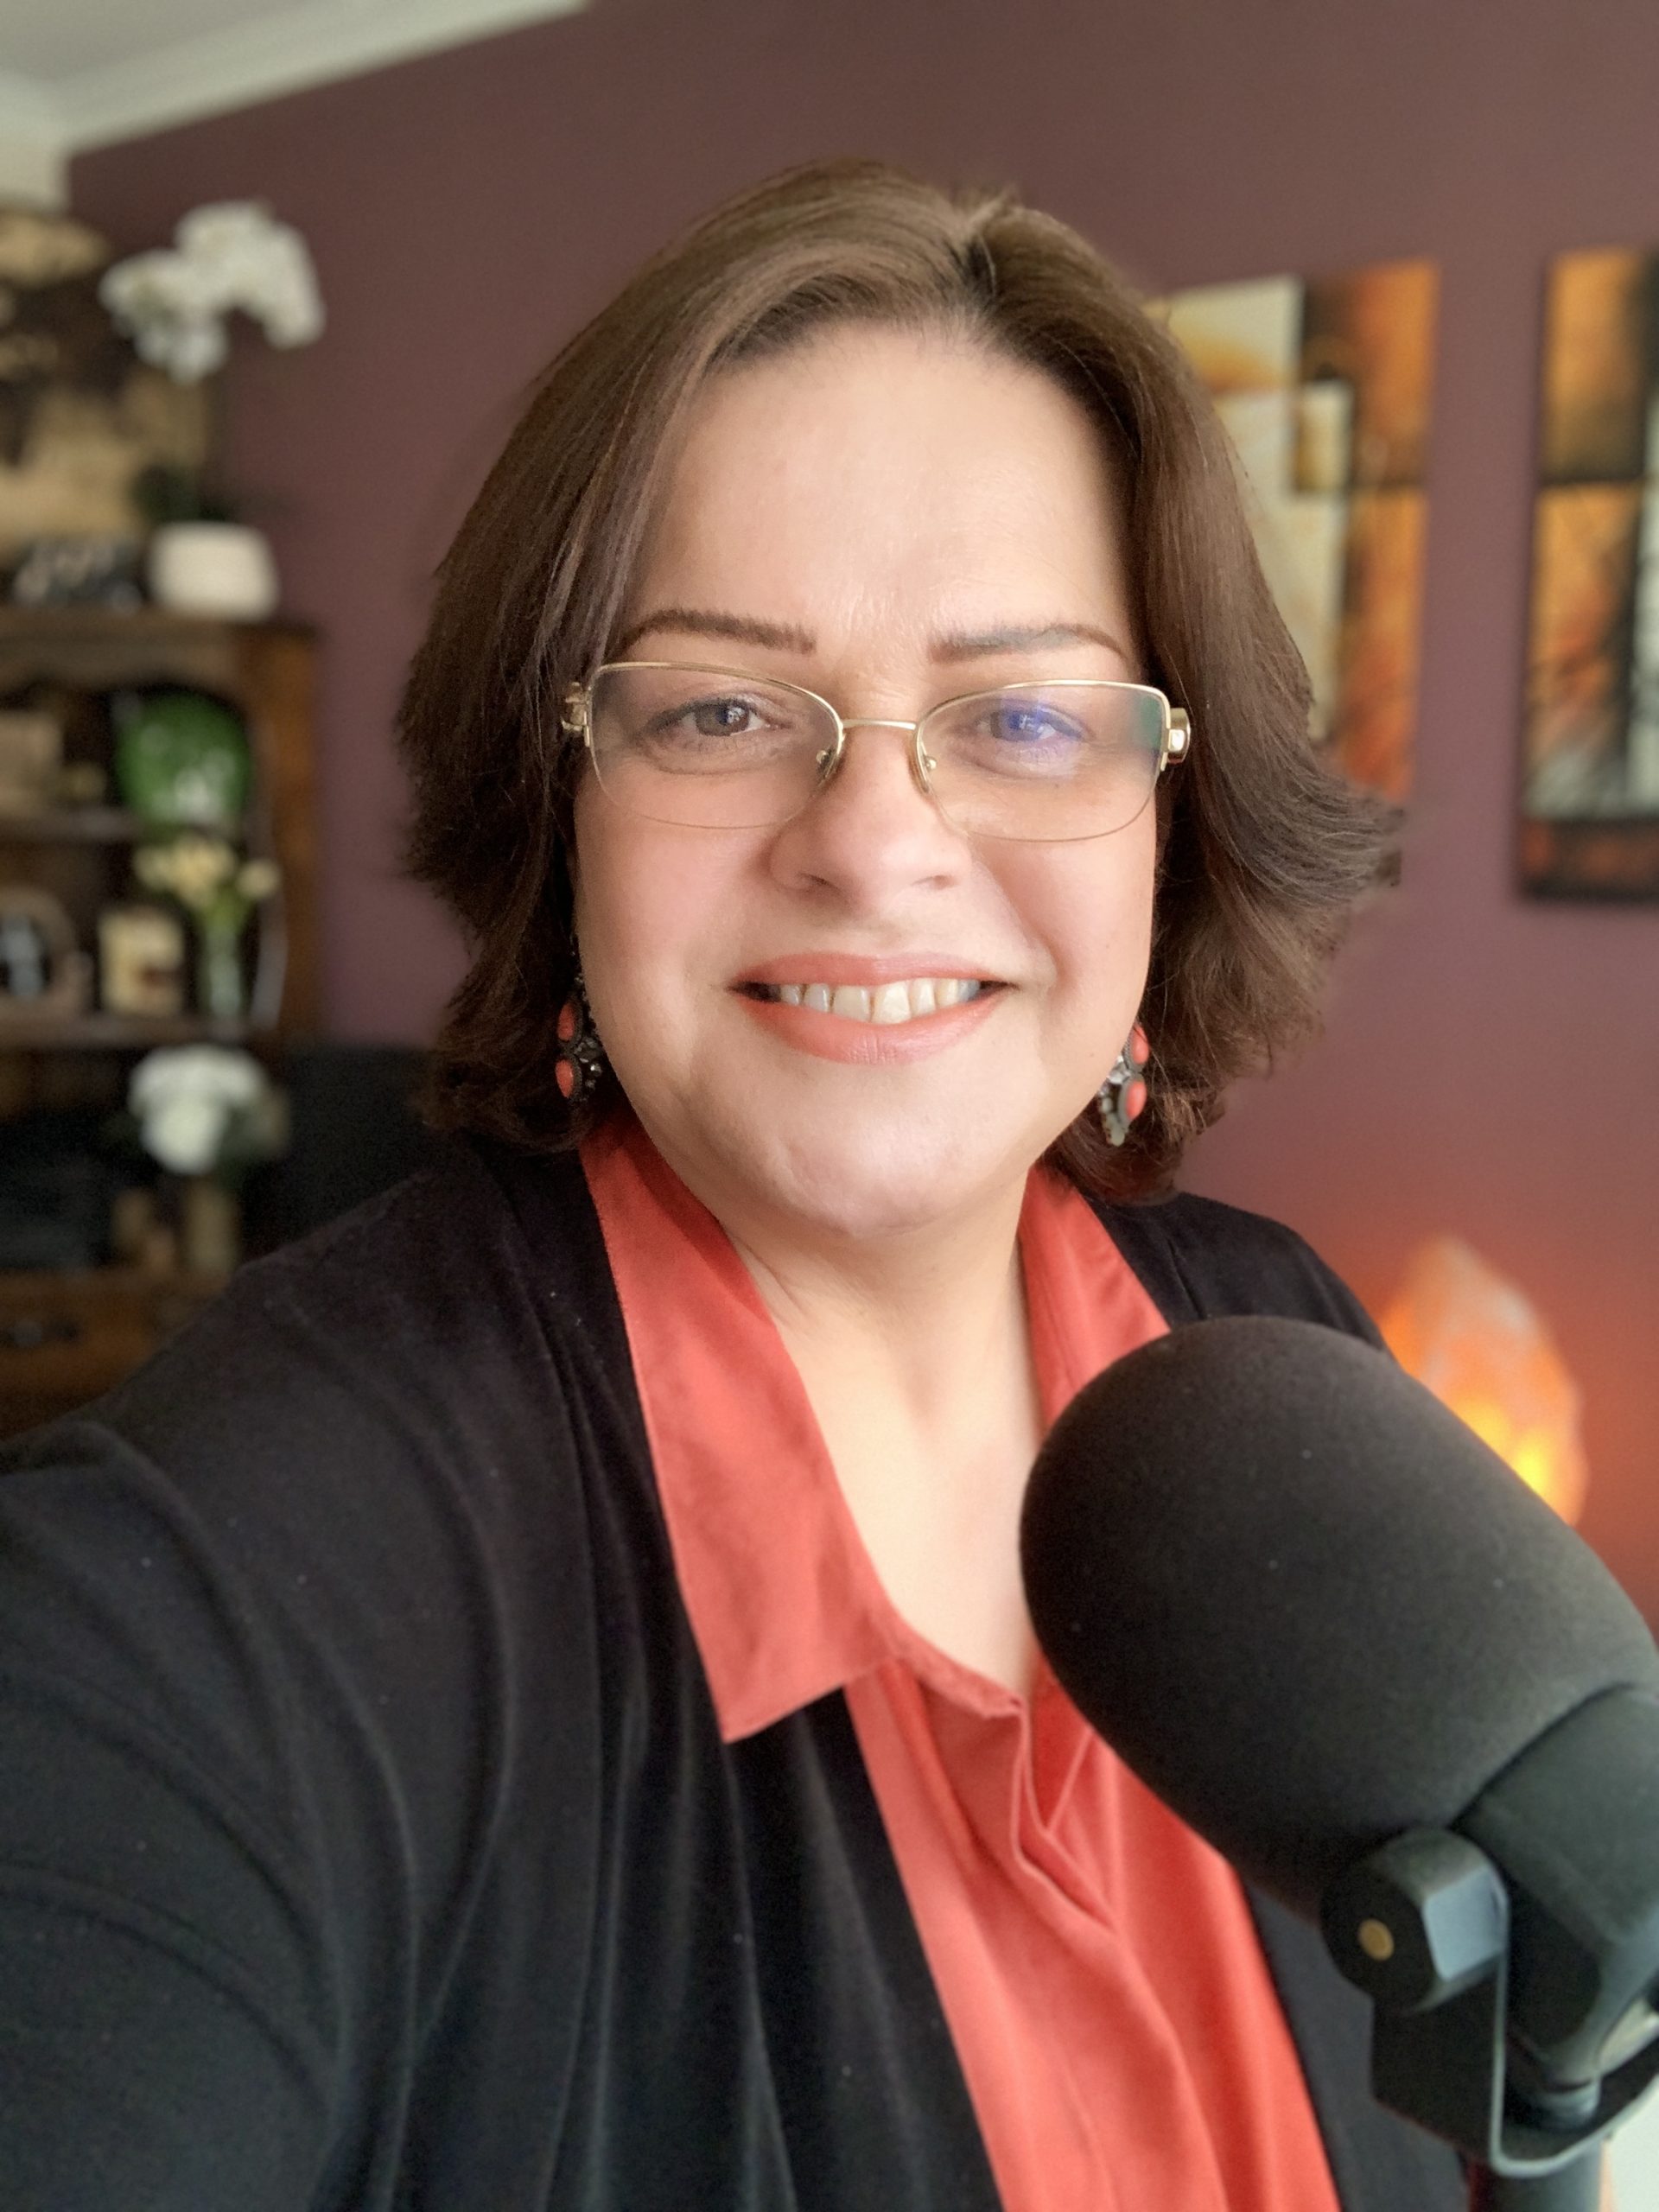 Episode #1405 How can a podcast help a writer, Annemarie Cross, book proposals, submit, submissions, agents, publishers, Publishing, Writing Journey, Book Marketing, Social Media, LinkedIn, Facebook, Pinterest, Instagram, Twitter, Marketing my book, How to grow Platform, Platform, How do I write a book, Book Coach, Writing Coach, Editor, Writing, Book, blogging, Editing, how to start a book, The Write Coach, The Write Coach Team, connect with readers, podcast, podcasting, how to podcast.